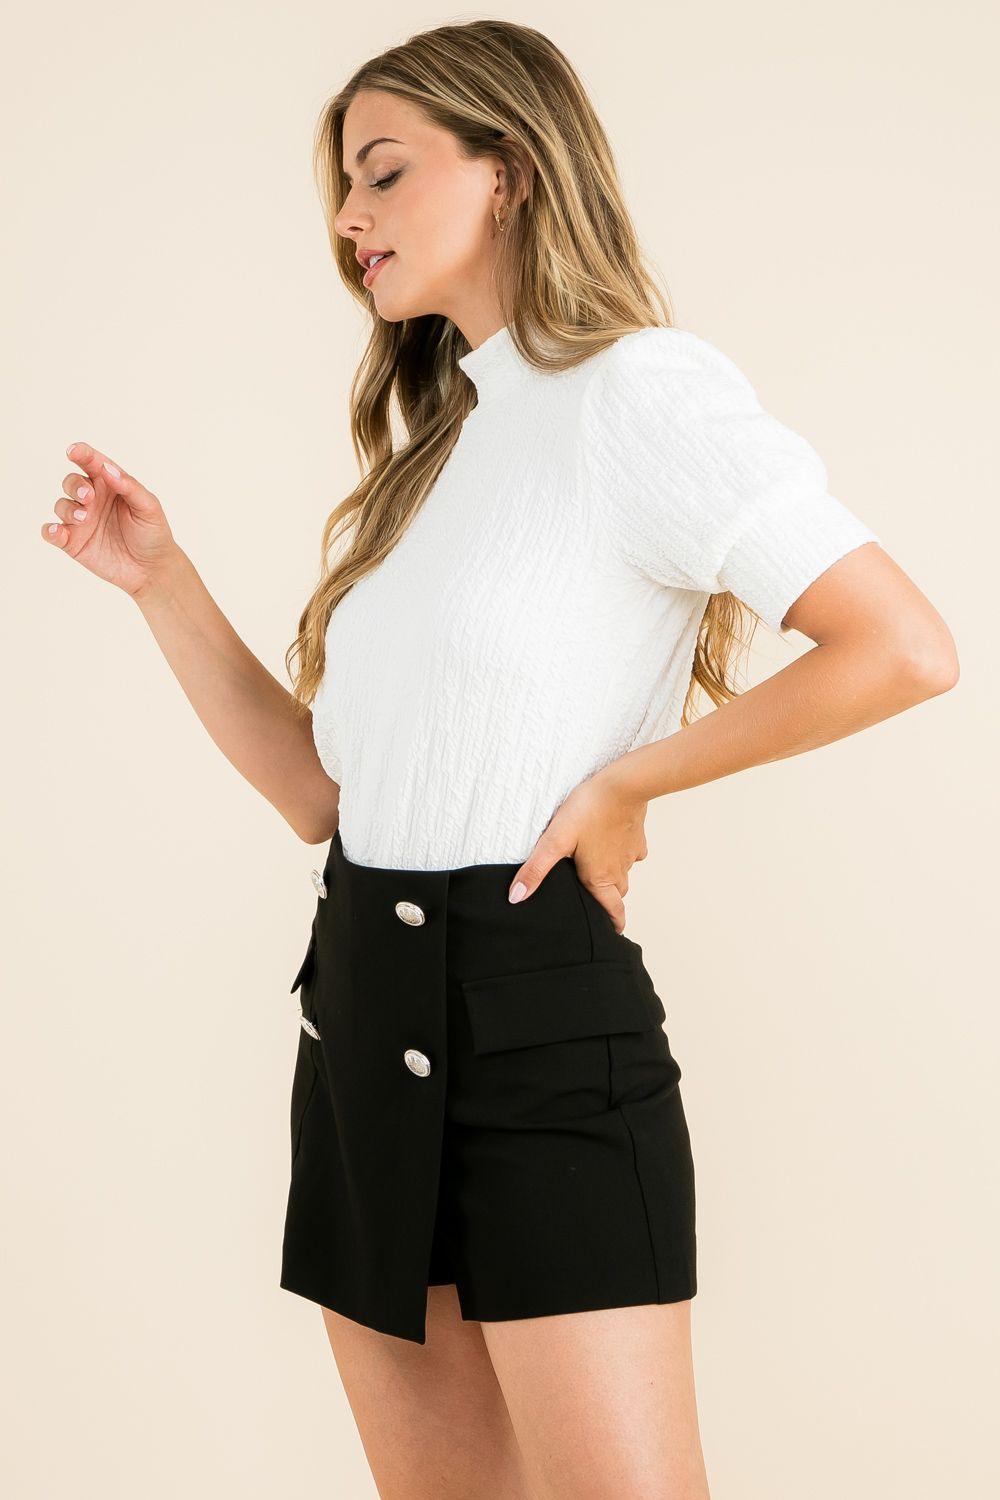 White THML Textured Mock Neck Top - Strawberry Moon Boutique